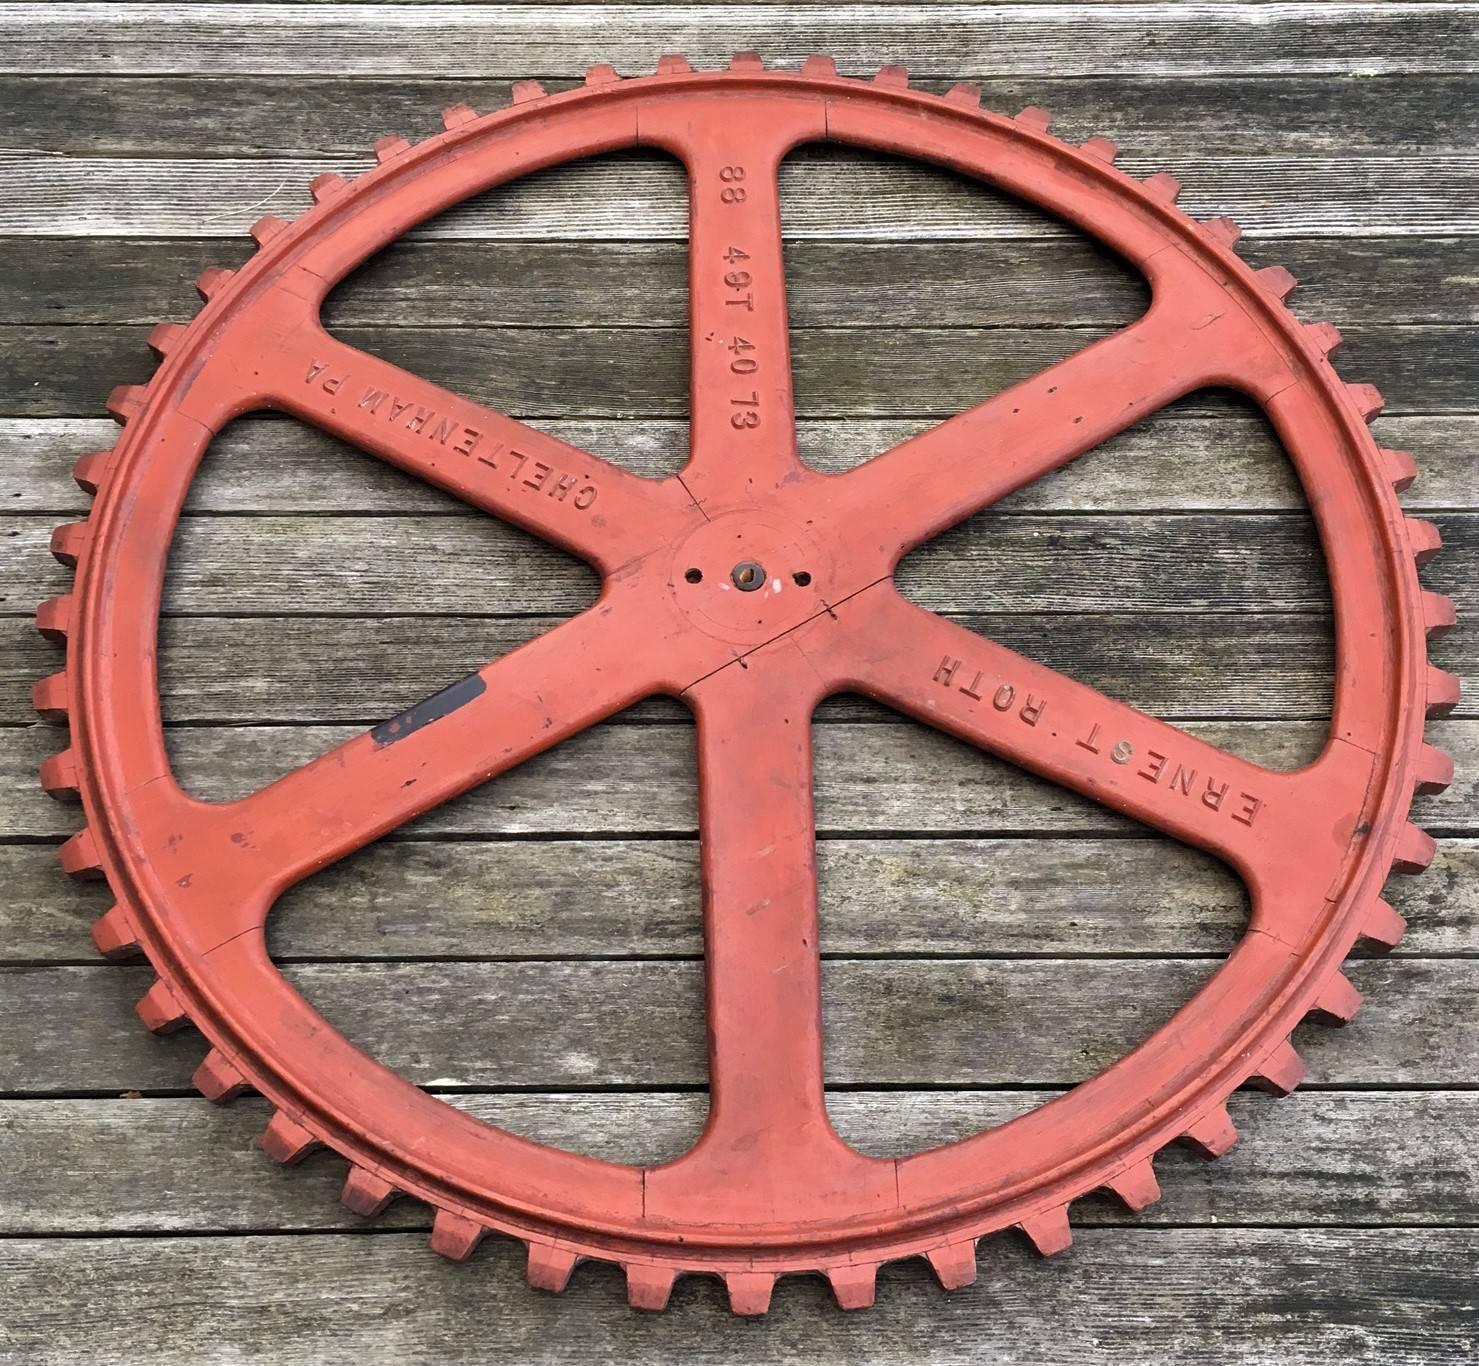 Two hand-carved wooden cog wheels, made for a foundry to cast metal cogs. They are in original red paint (the larger wheel is a darker brick red, the smaller a lighter terra cotta red). The smaller wheel has raised relief 
lettering spelling